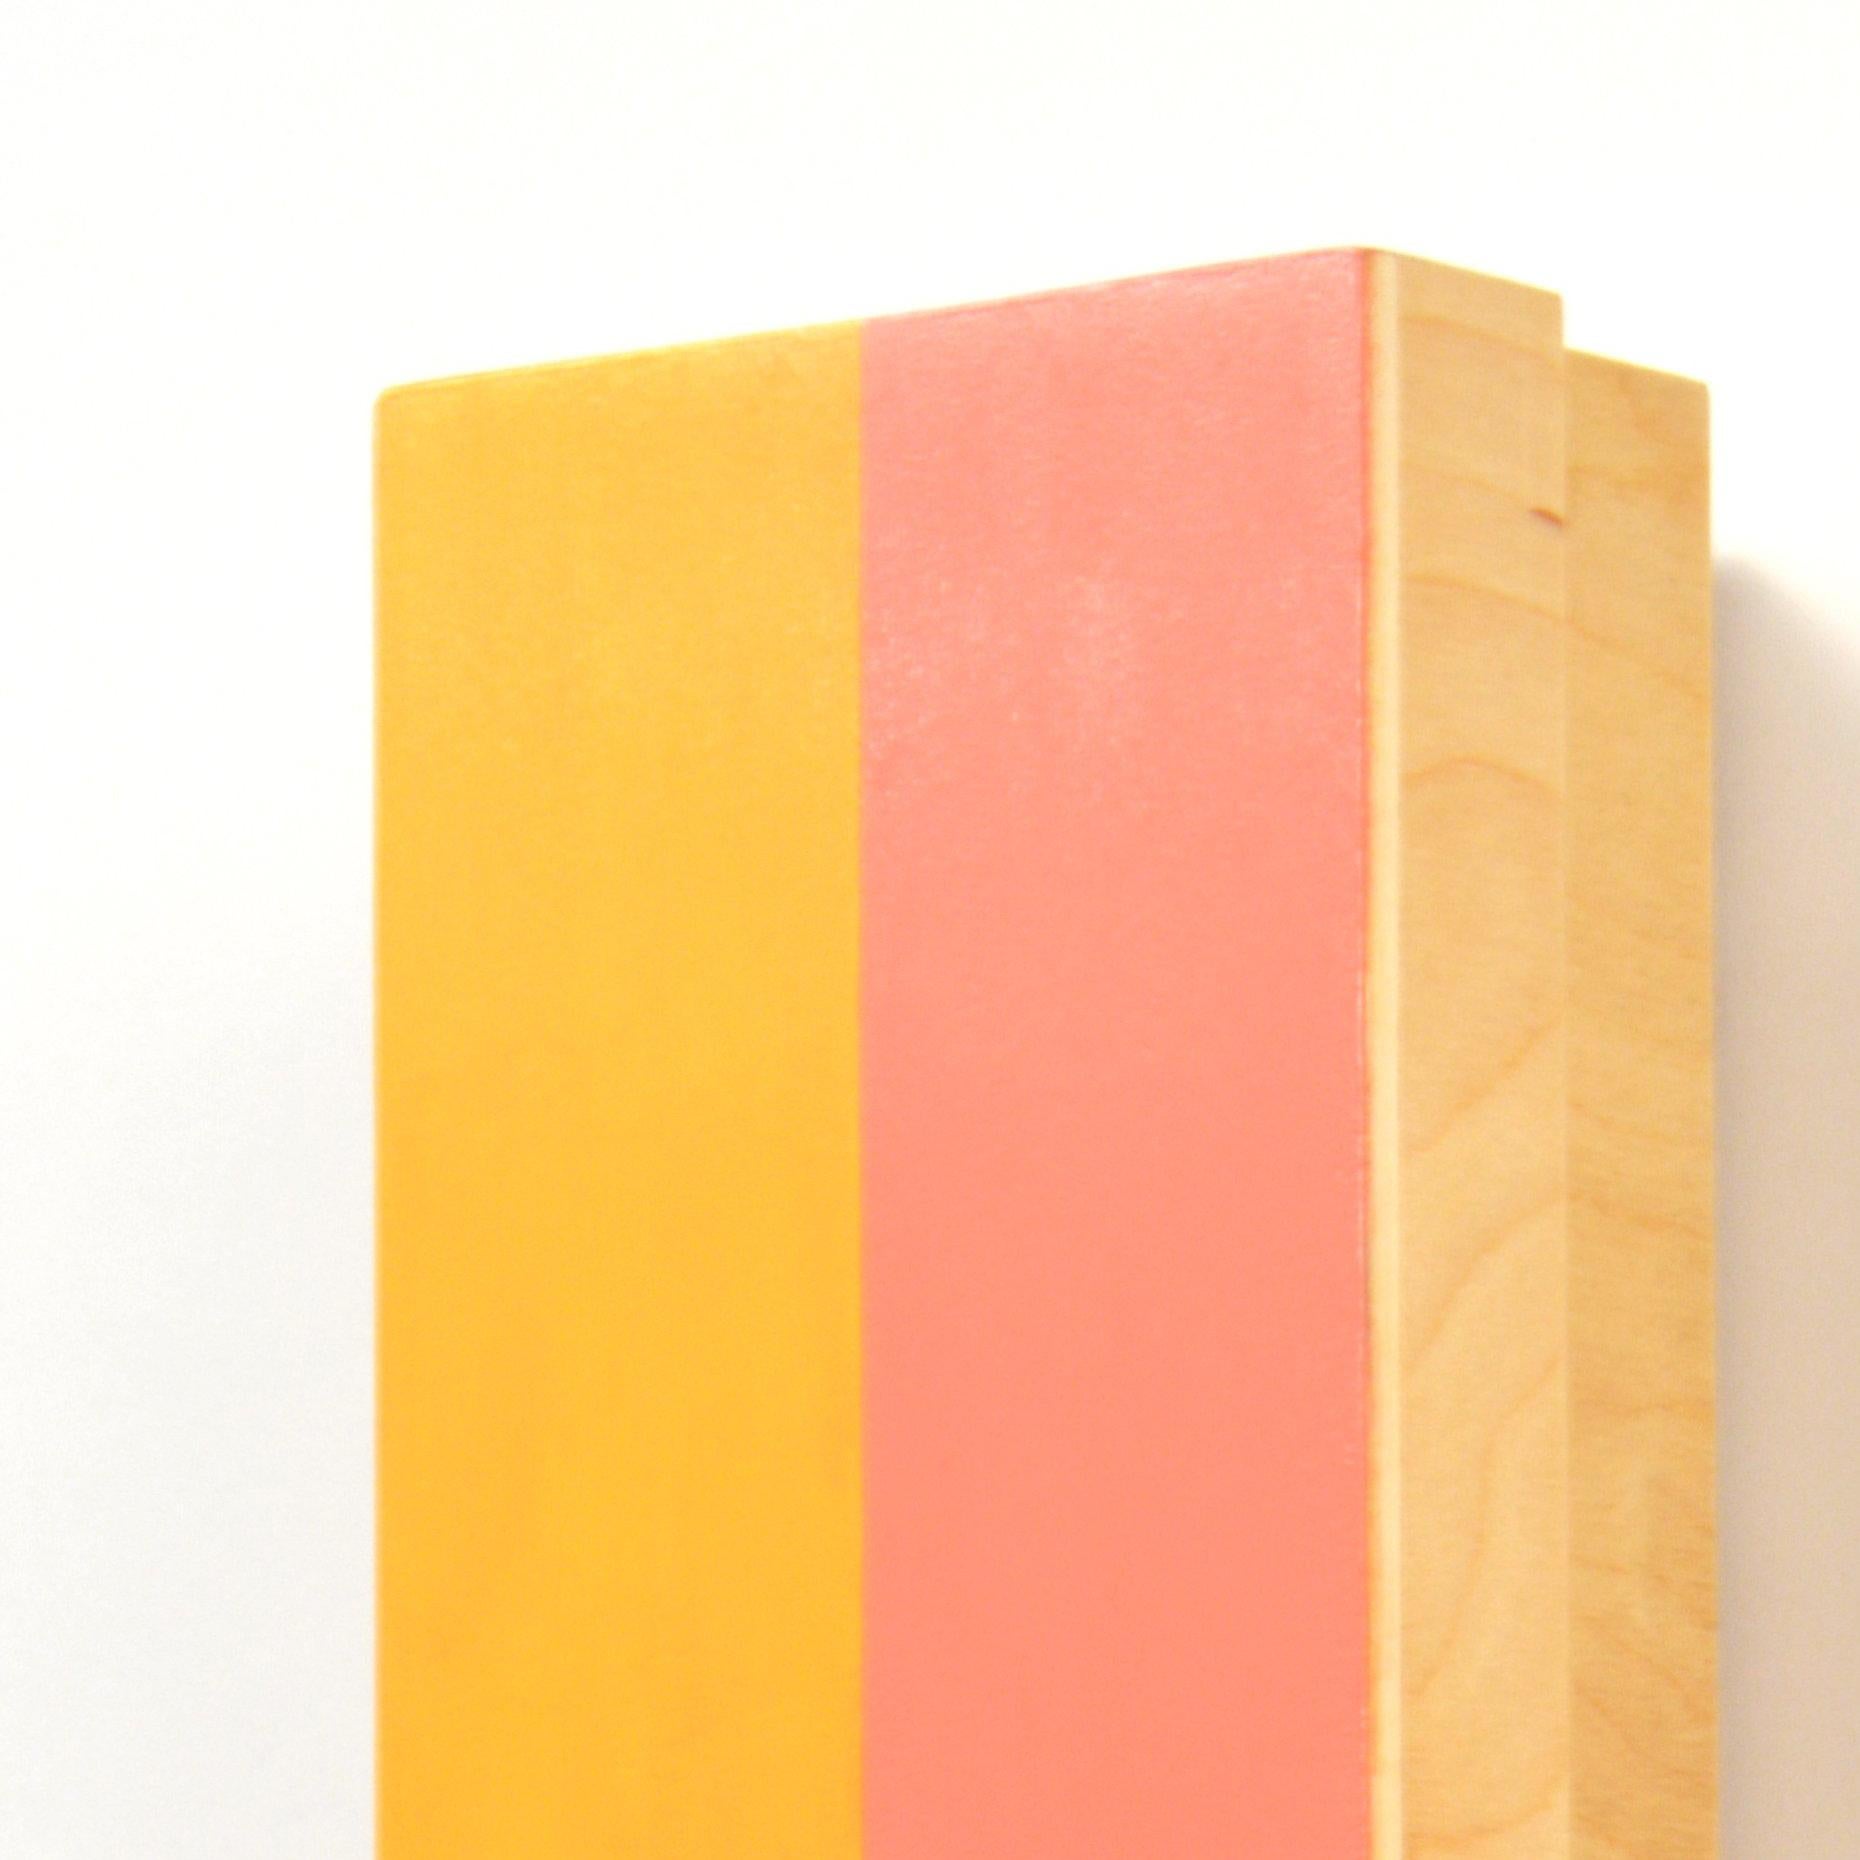 Kevin Finklea’s painted geometric sculptures on wood are directed with the artists care to form and balance, further informed by the artist's almost obsessive attention and devotion to color. The areas of saturated color itself are purposefully